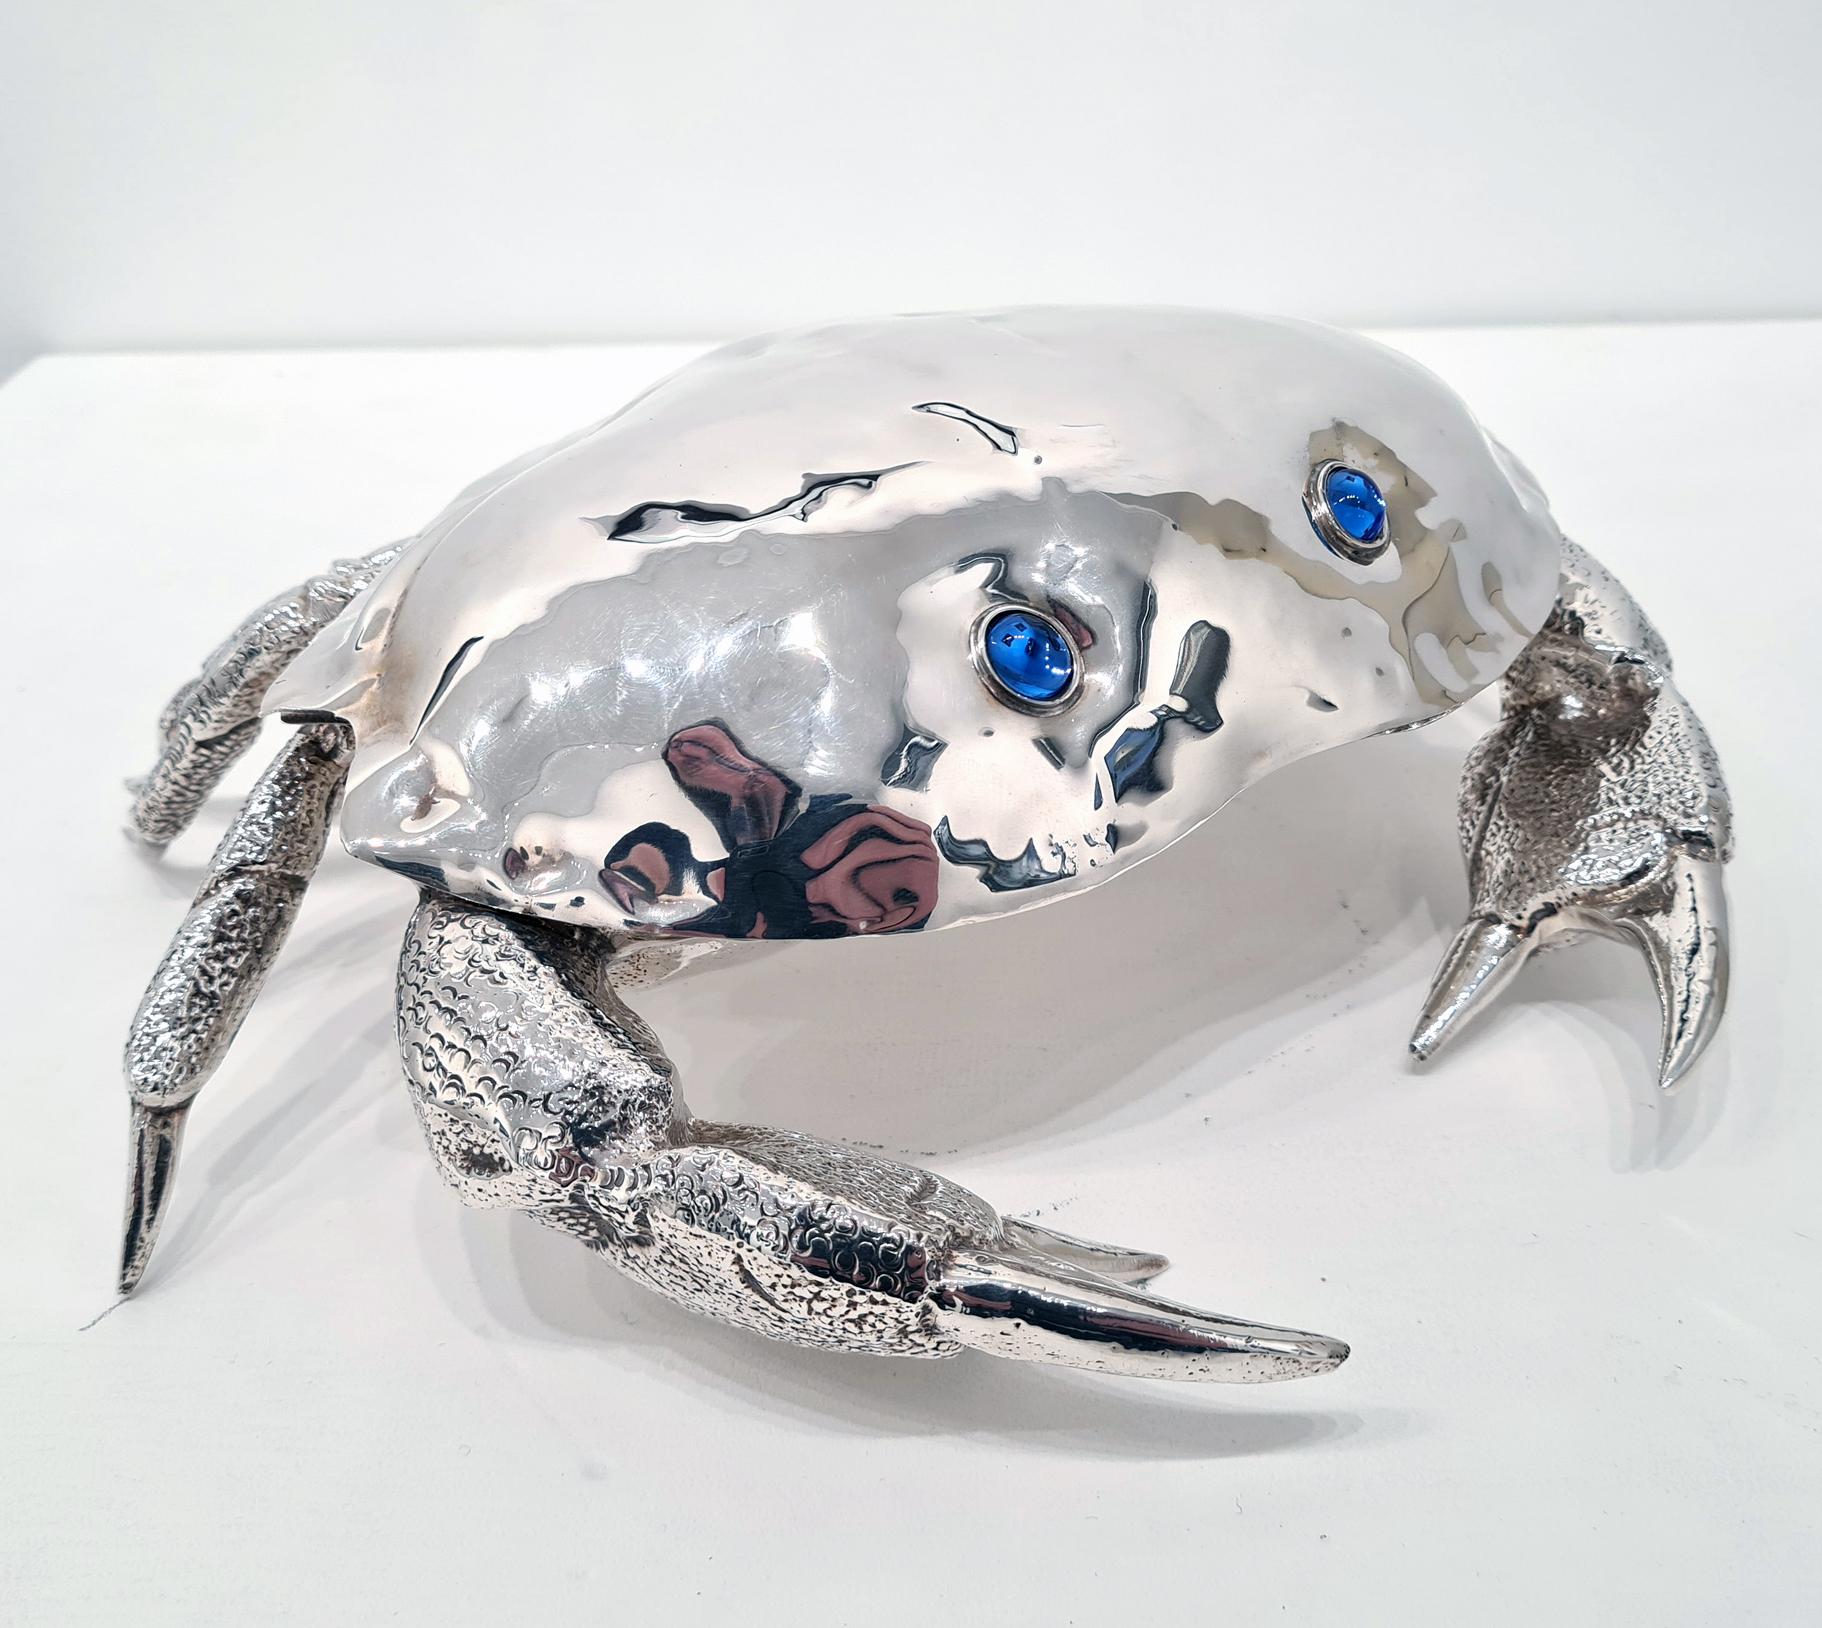 A silver-plated caviar dish in the shape of a crab, made by Almazan in Spain c. 1970. 

The crab is excellently modelled, with fine attention to detail in the legs and claws. The original inset glass bowl for the caviar is a rich sapphire blue, and